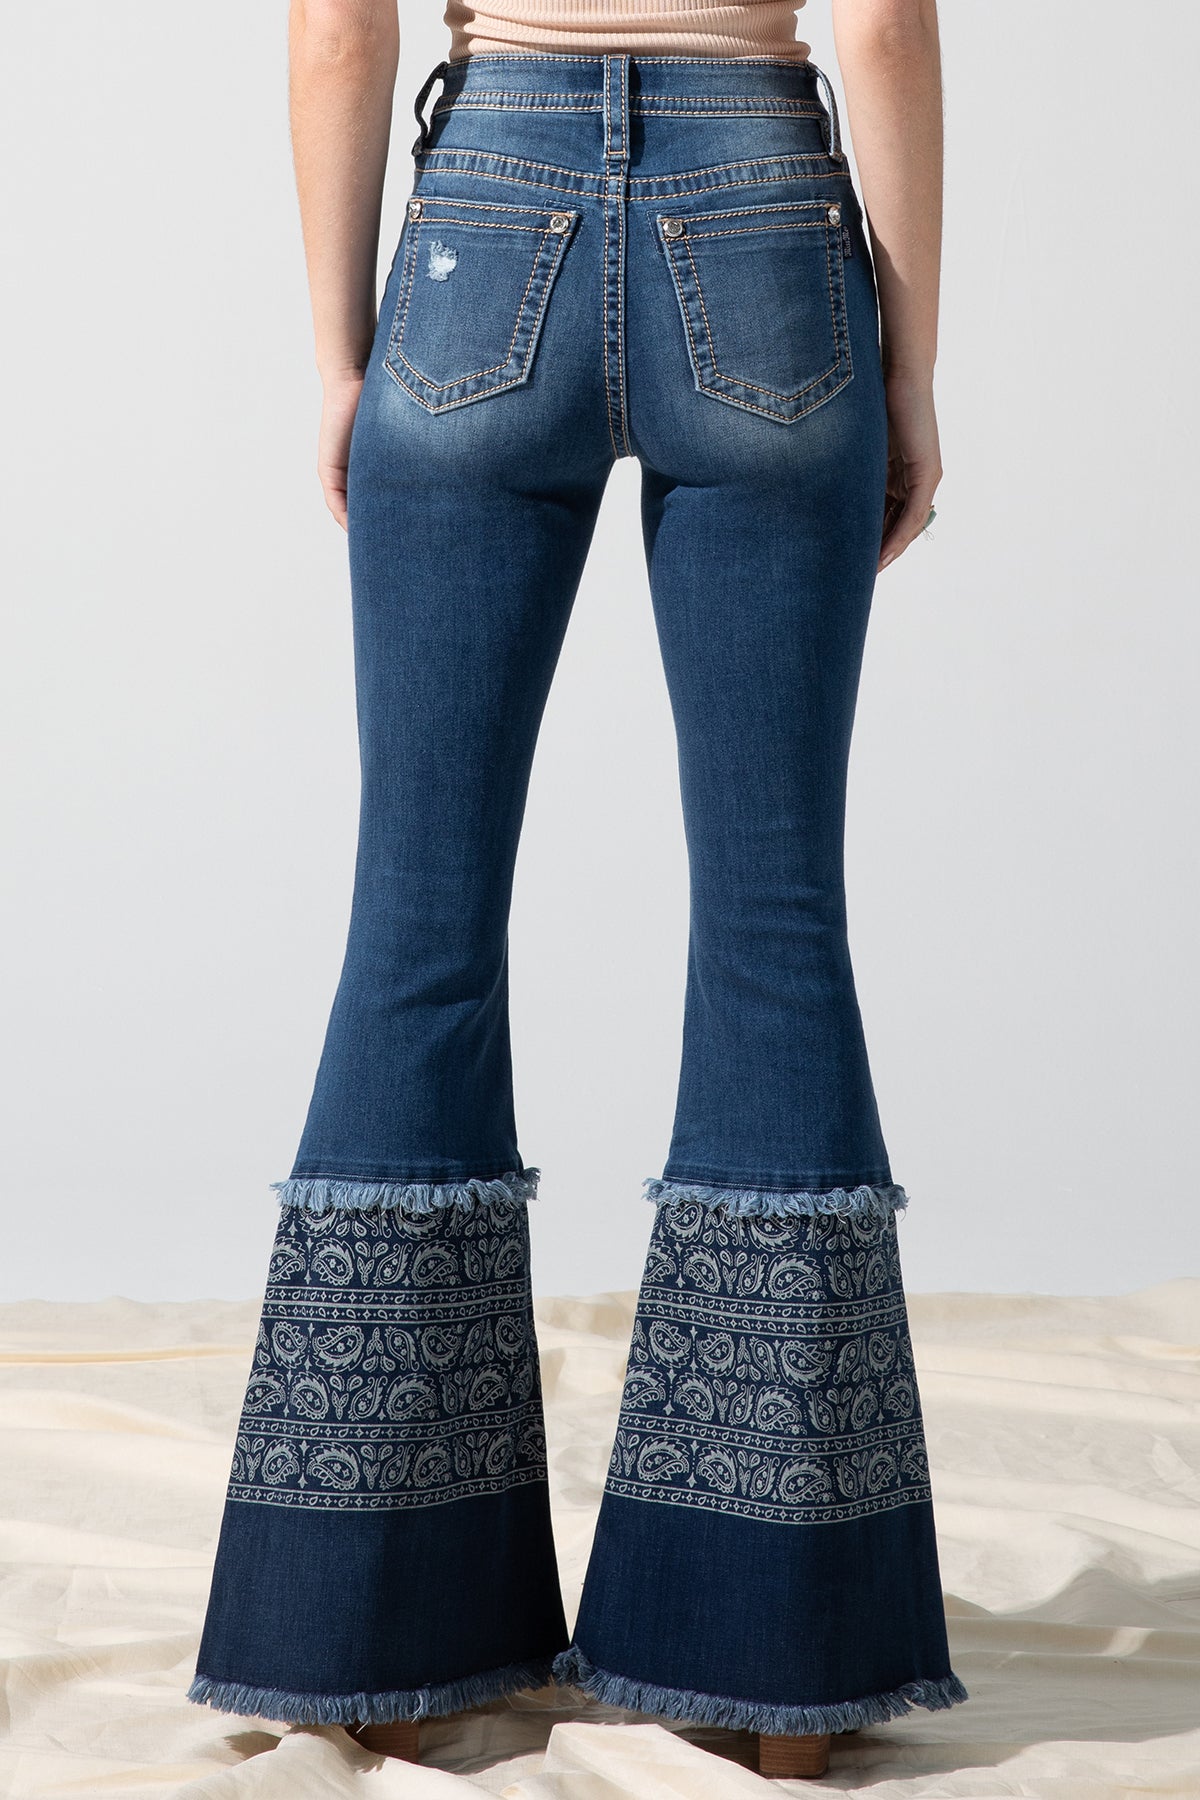 Its Retro Flare Jeans